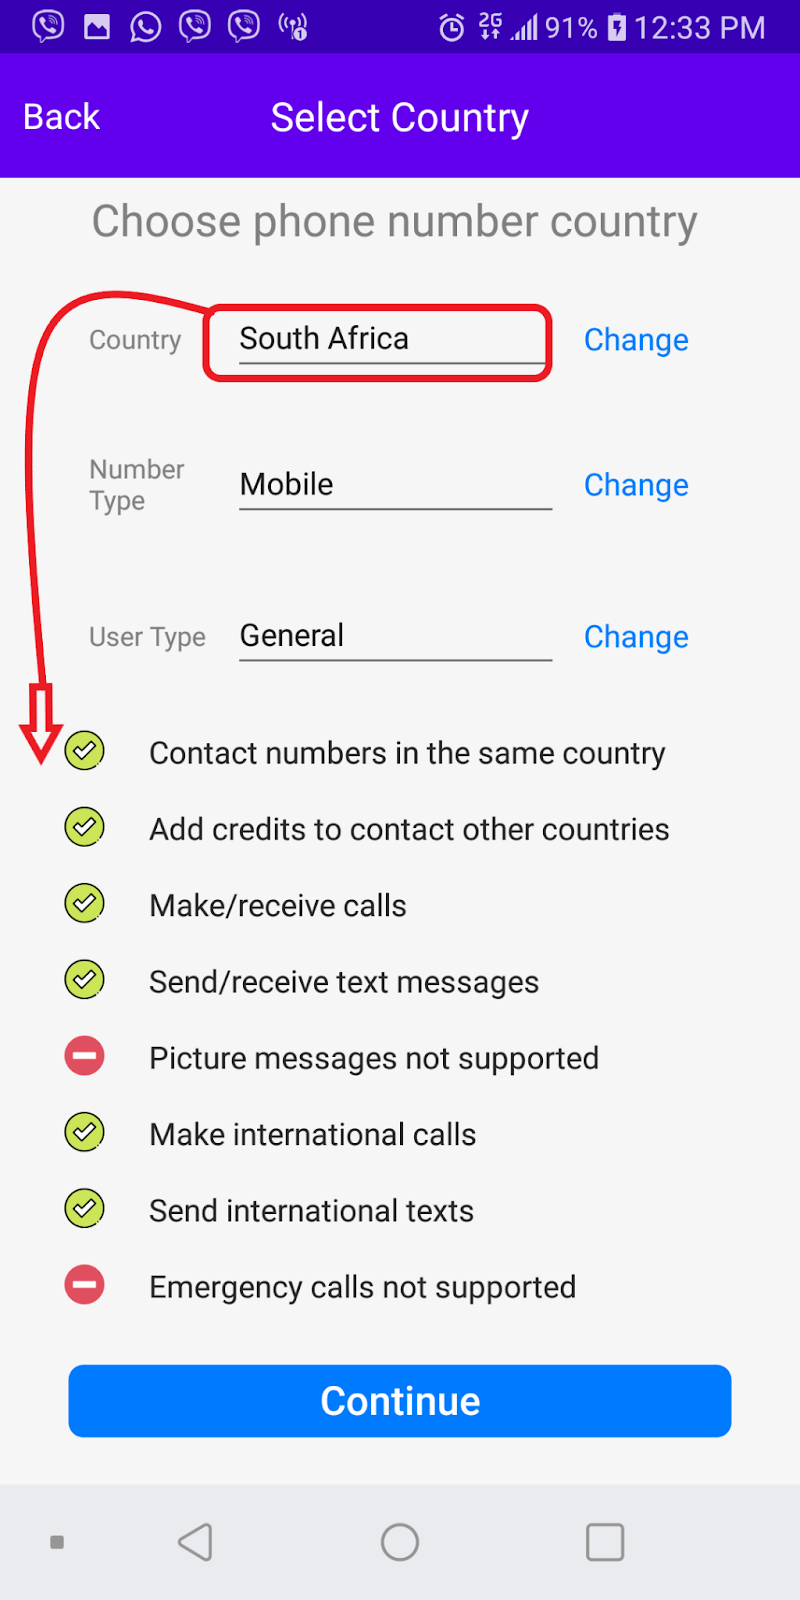 services on the list with ⛔ are not accessible for your country choice